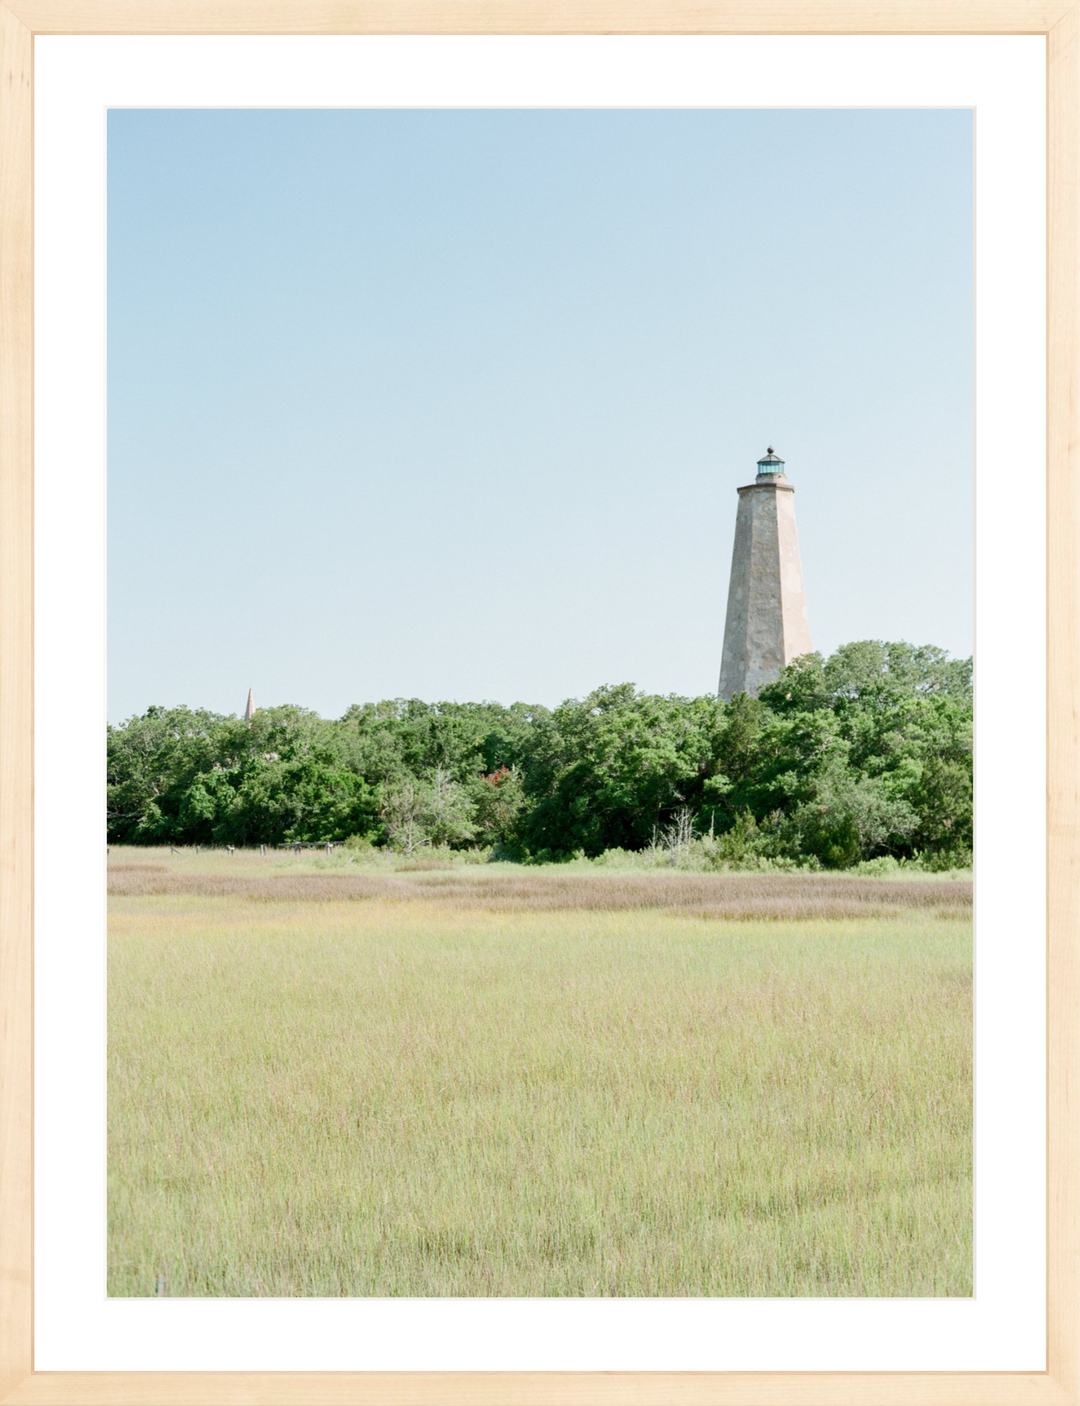 Ode to Old Baldy